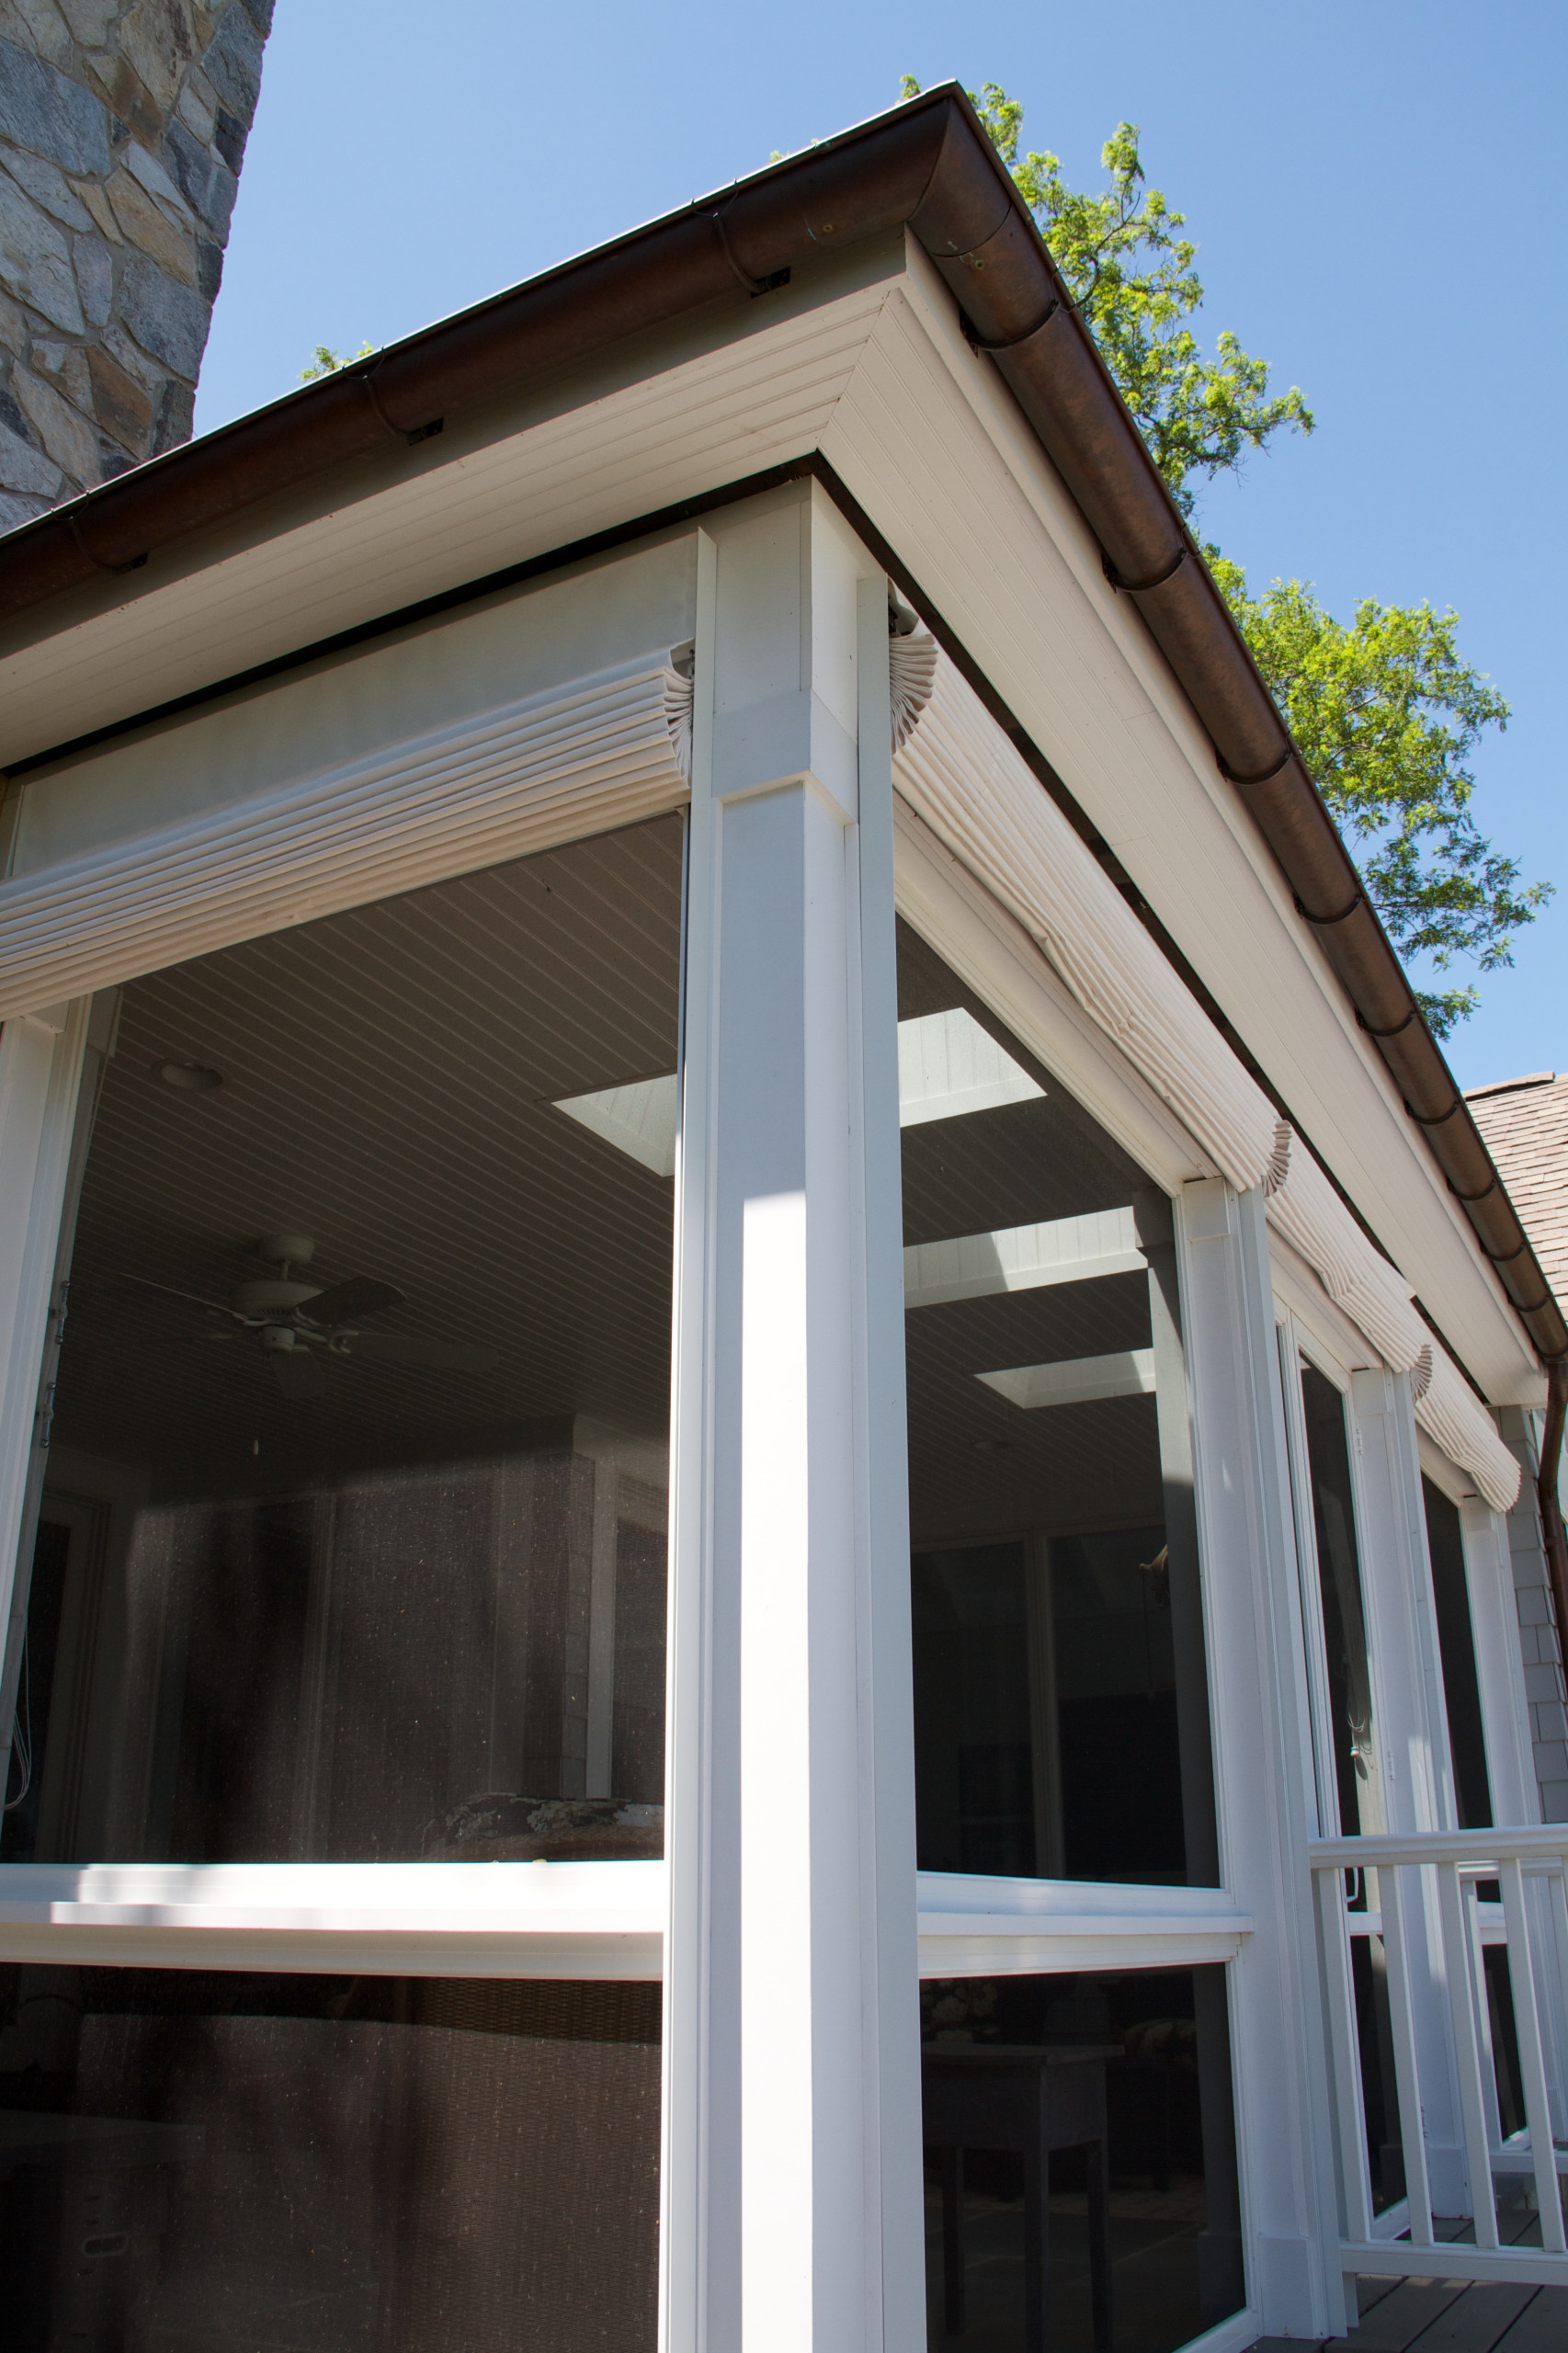 Outdoor shades lift from inside screen porch.